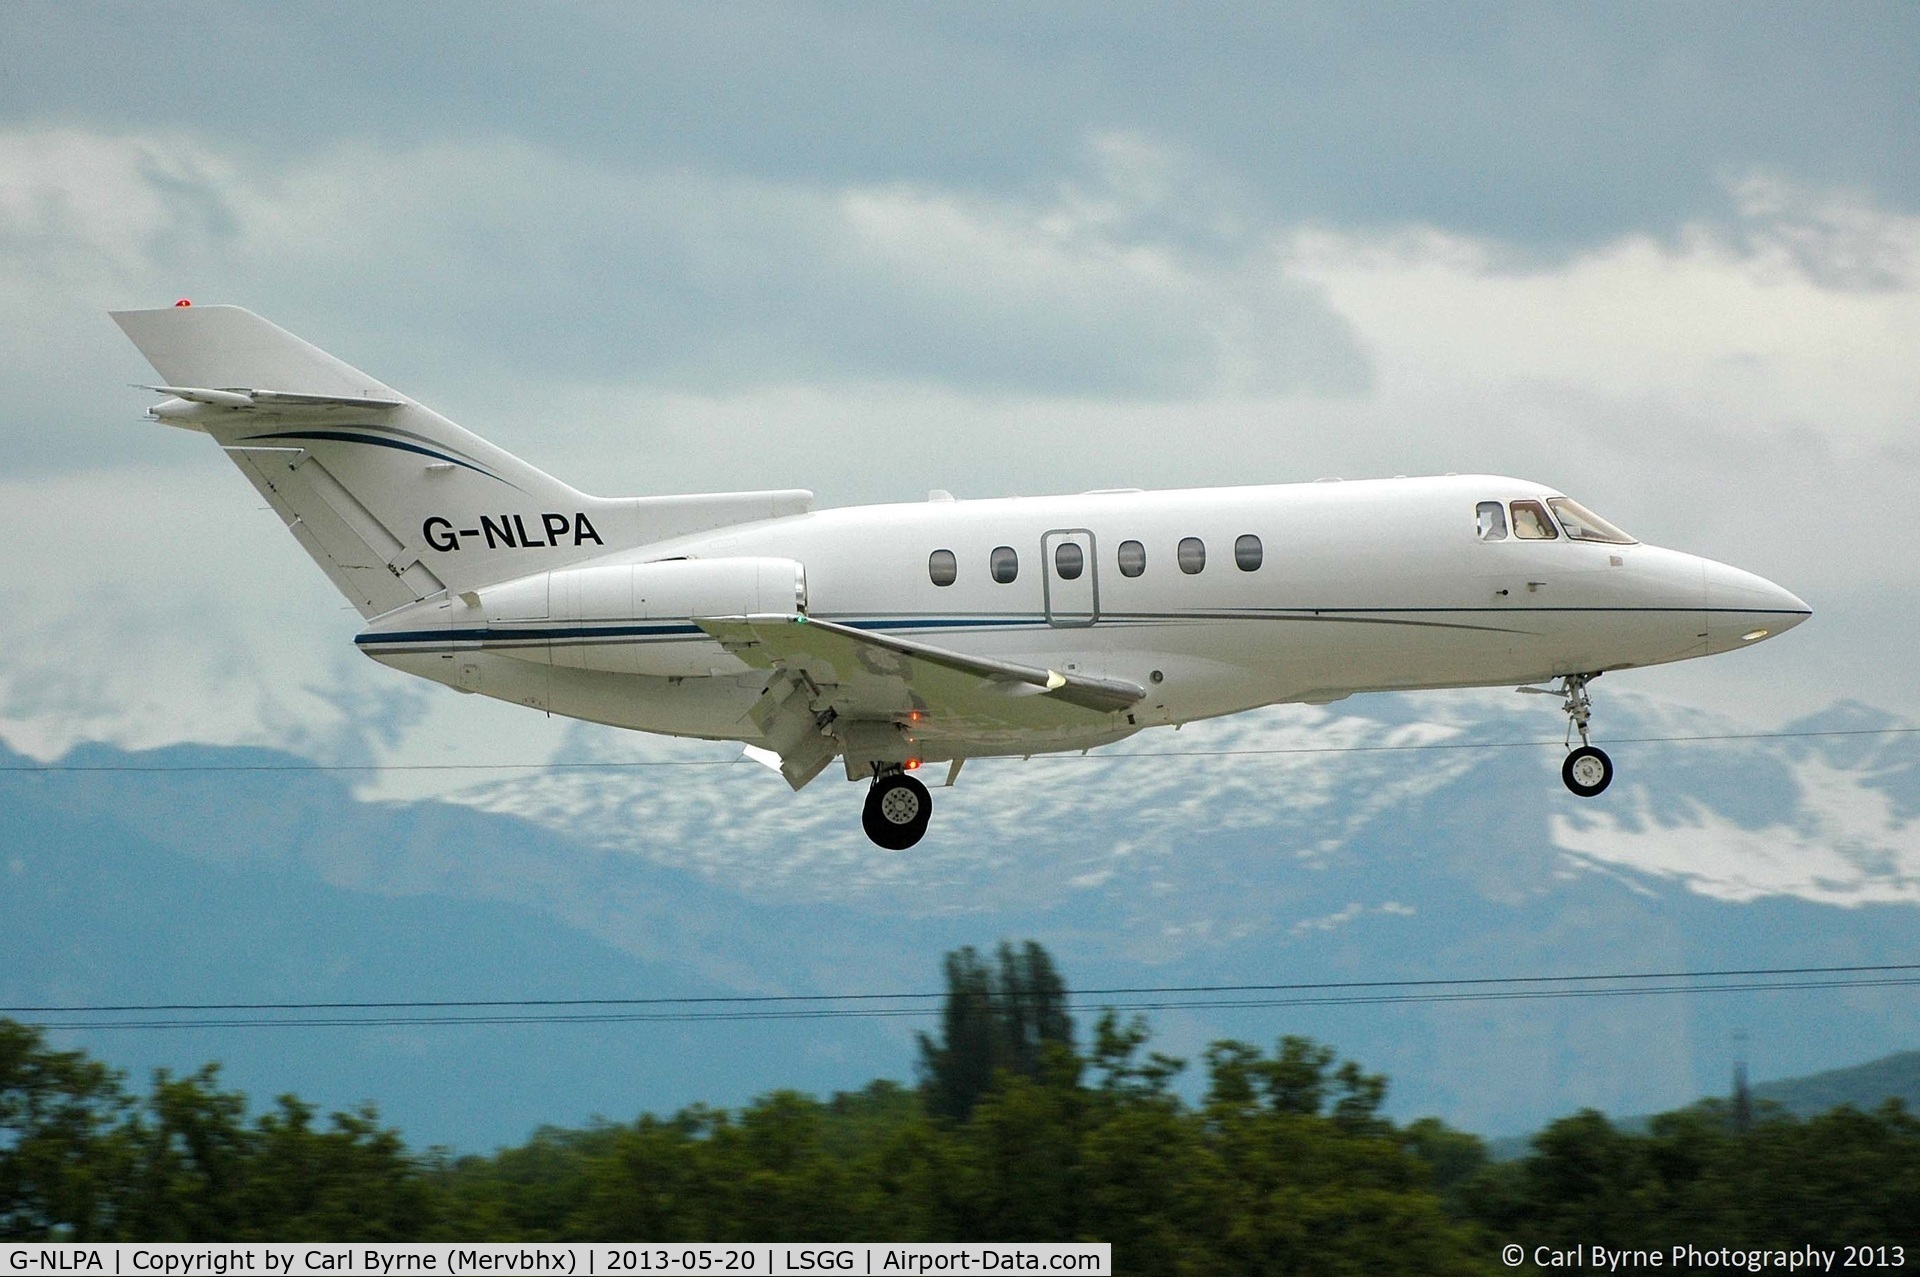 G-NLPA, 2008 Hawker 750 C/N HB-14, Taken from the park at the 05 threshold.